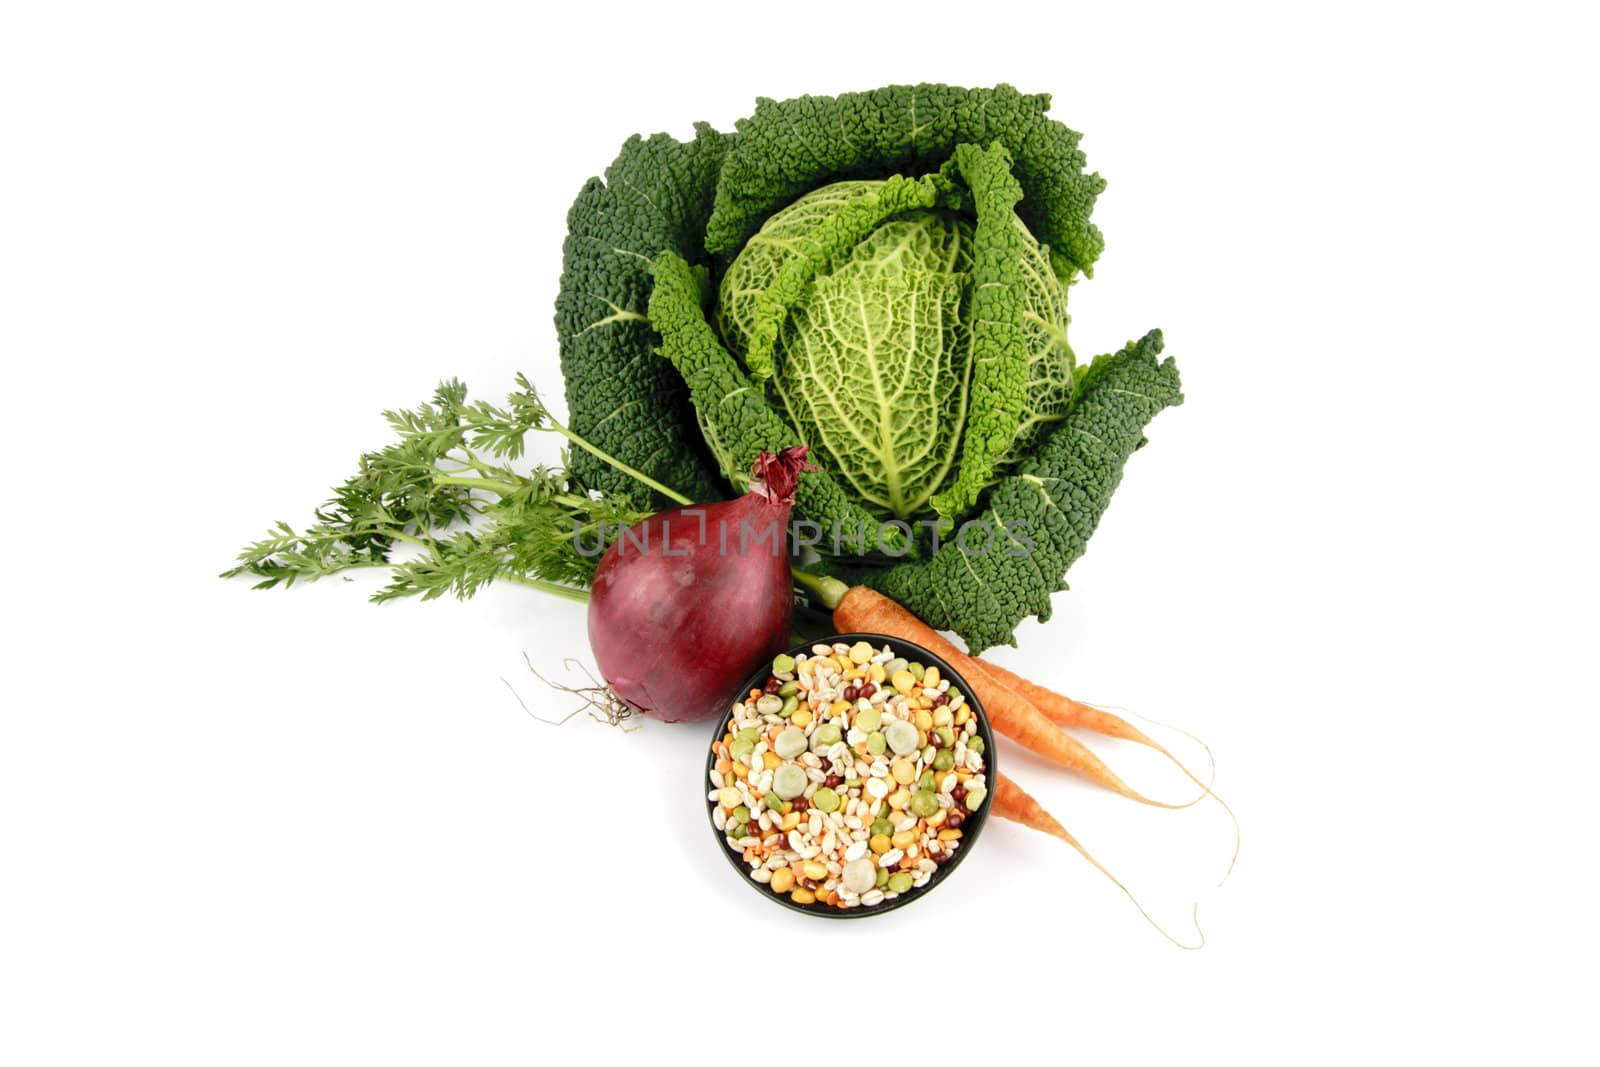 Single green raw cabbage with a single red onion and soup pulses on a reflective white background